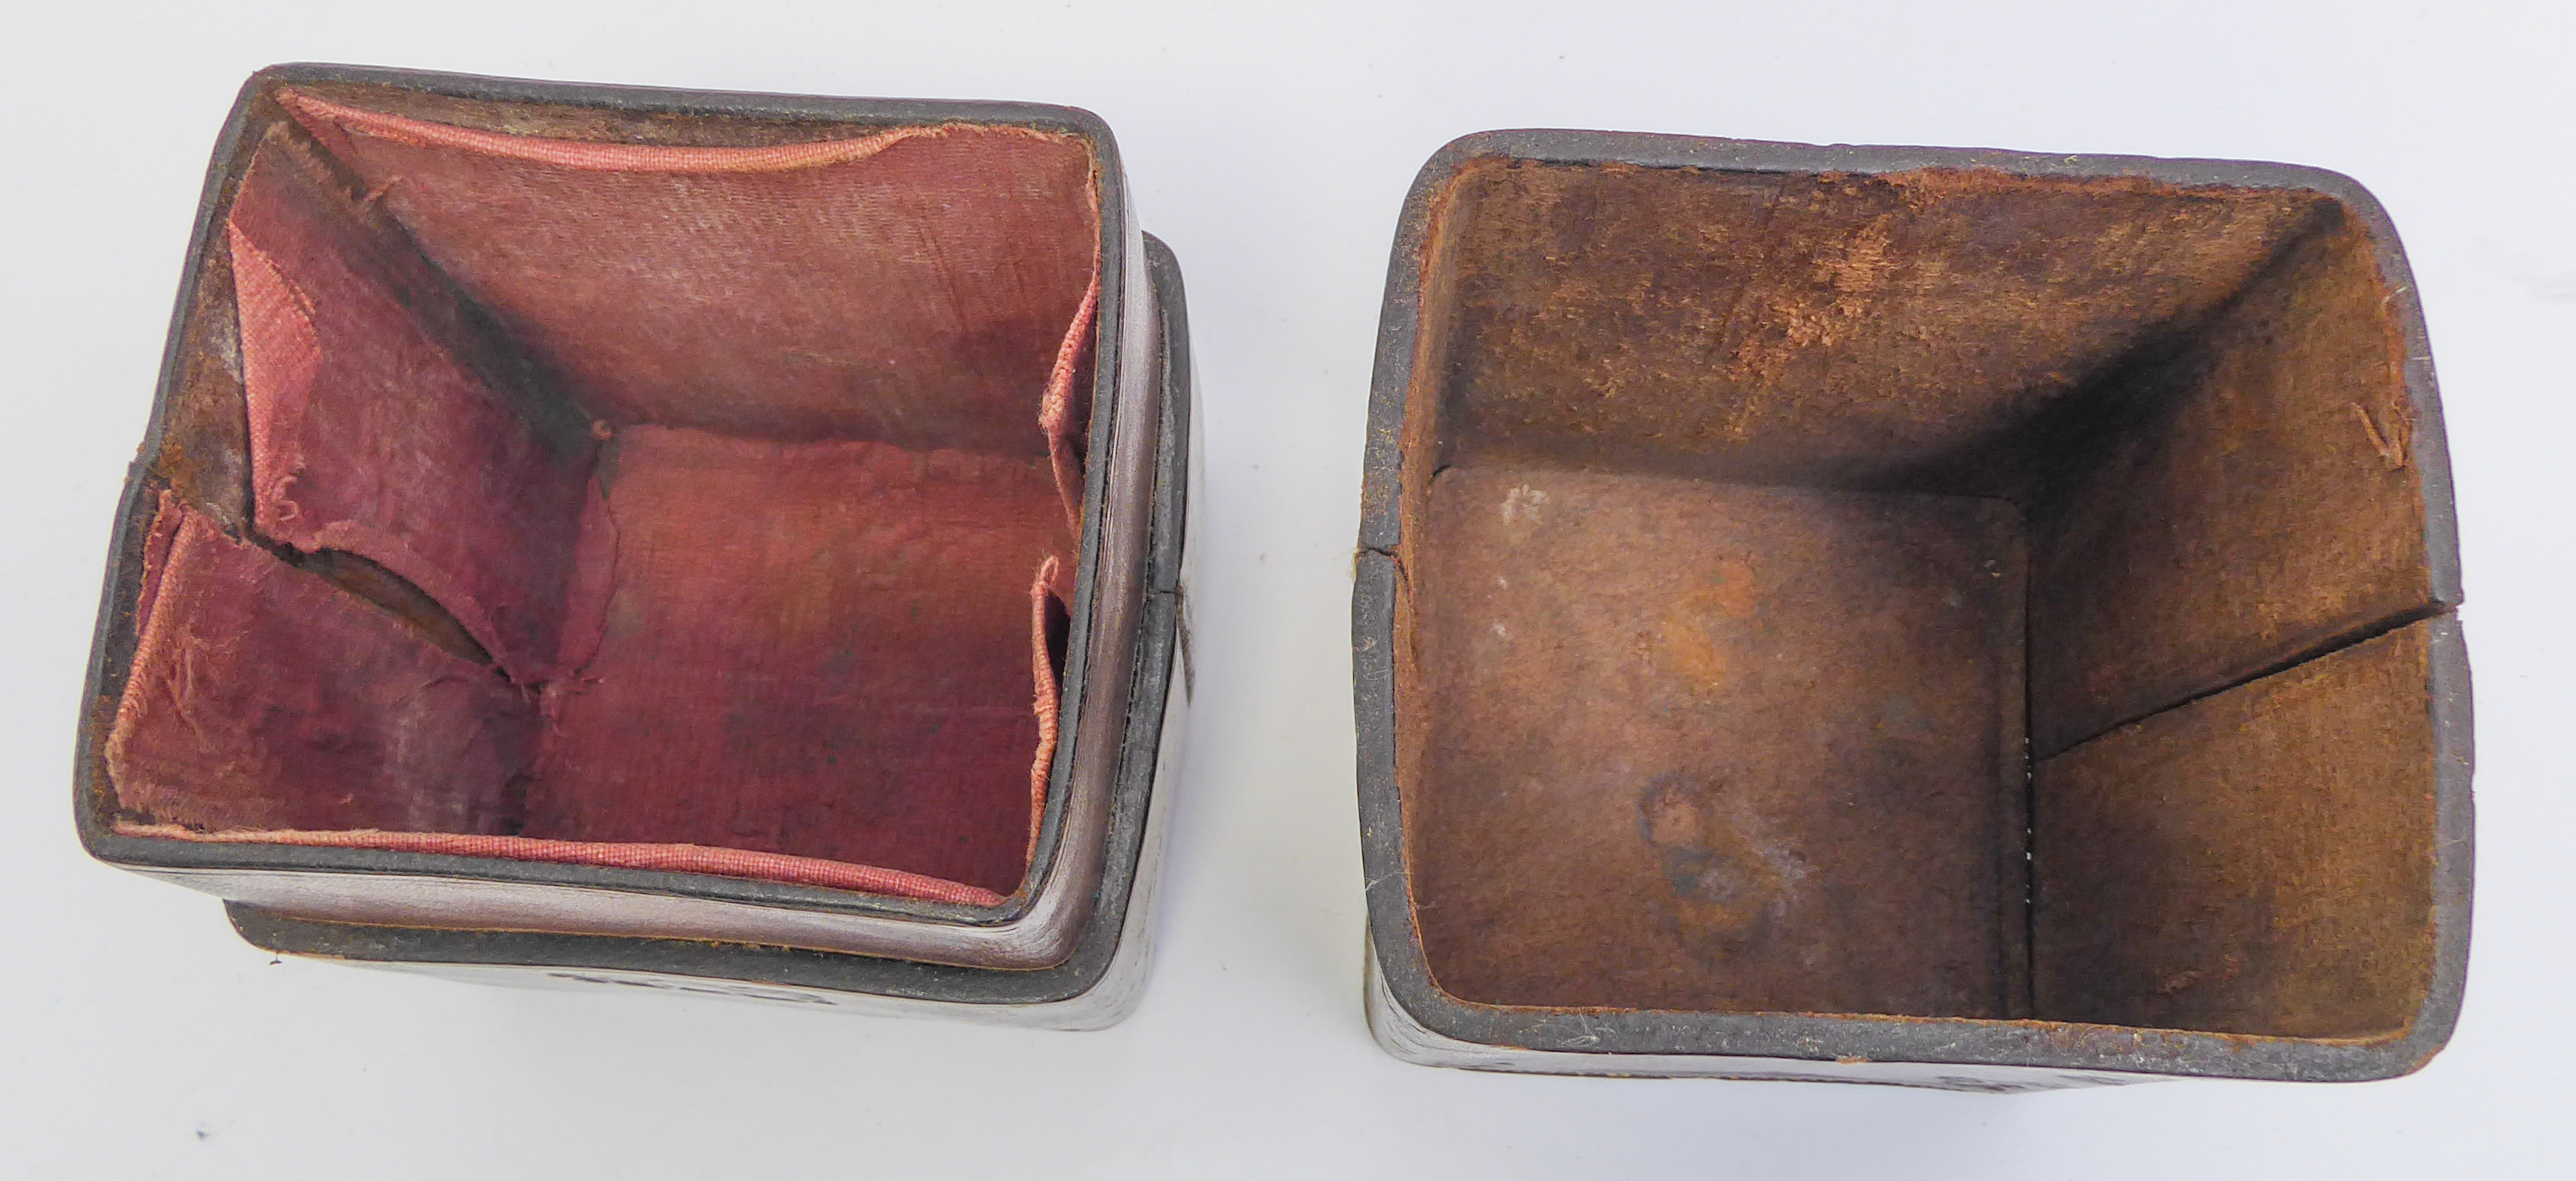 A leather-cased cut-glass and silver plate hunting flask and a leather-cased sandwich box and - Image 7 of 8